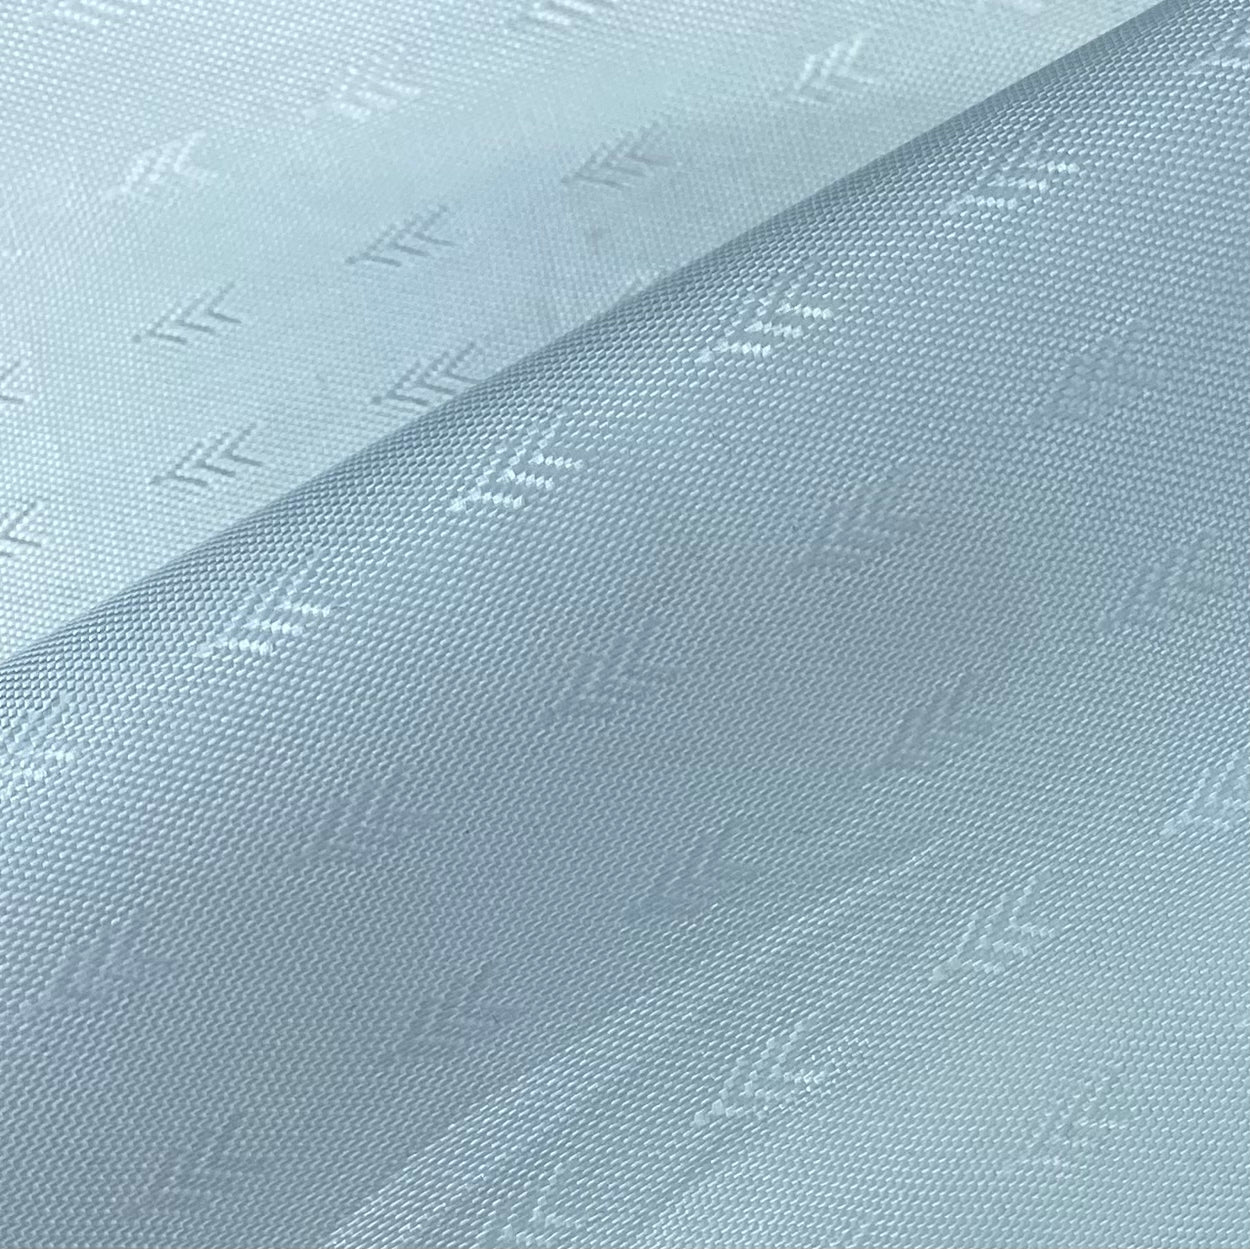 Patterned Lining - White